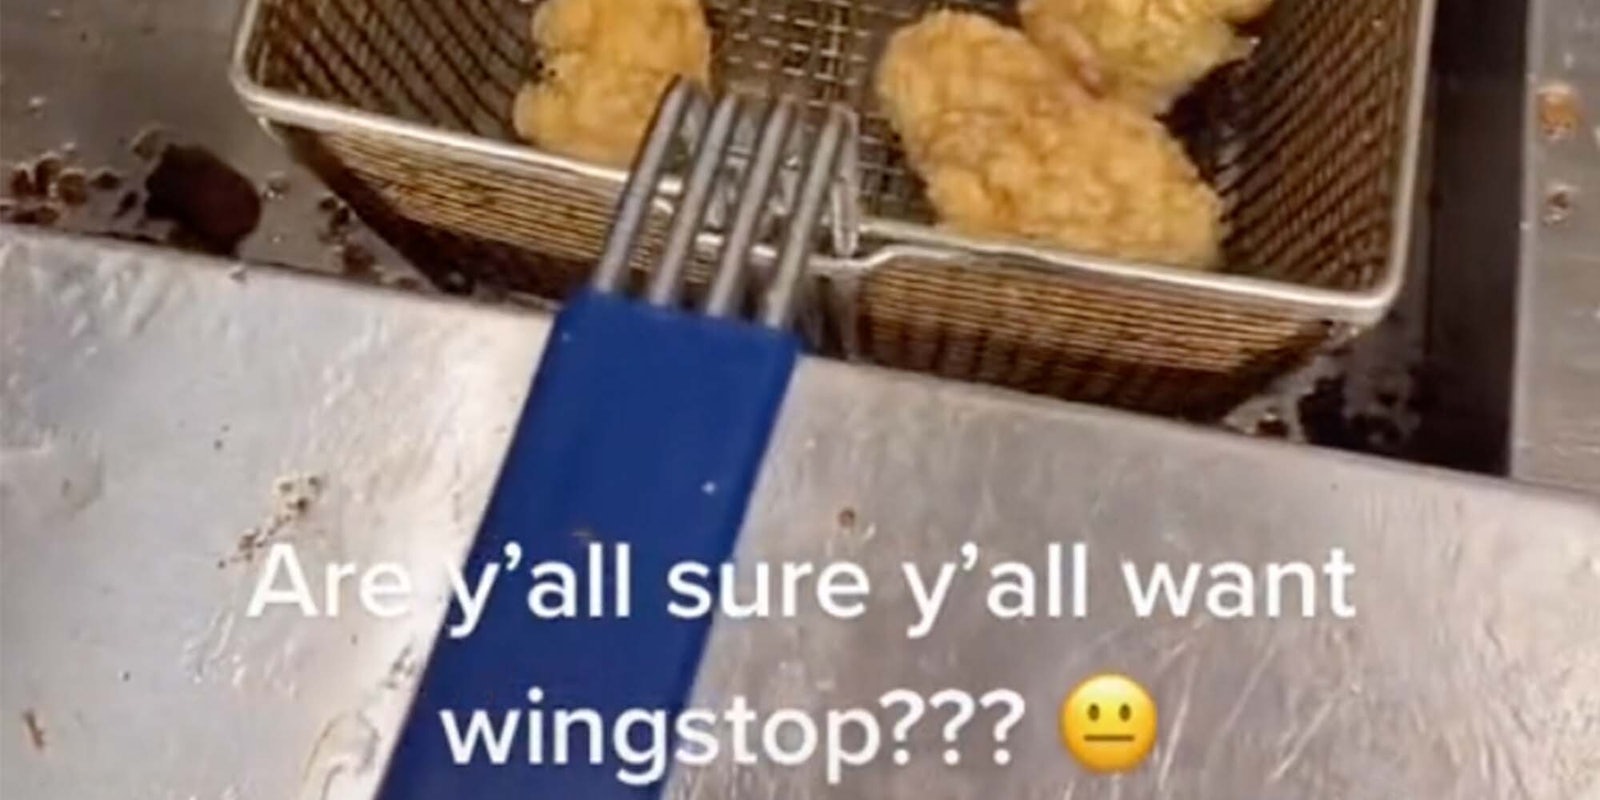 A former Wingstop employee alleged that Wingstop employees are told to not wear gloves when handling food.